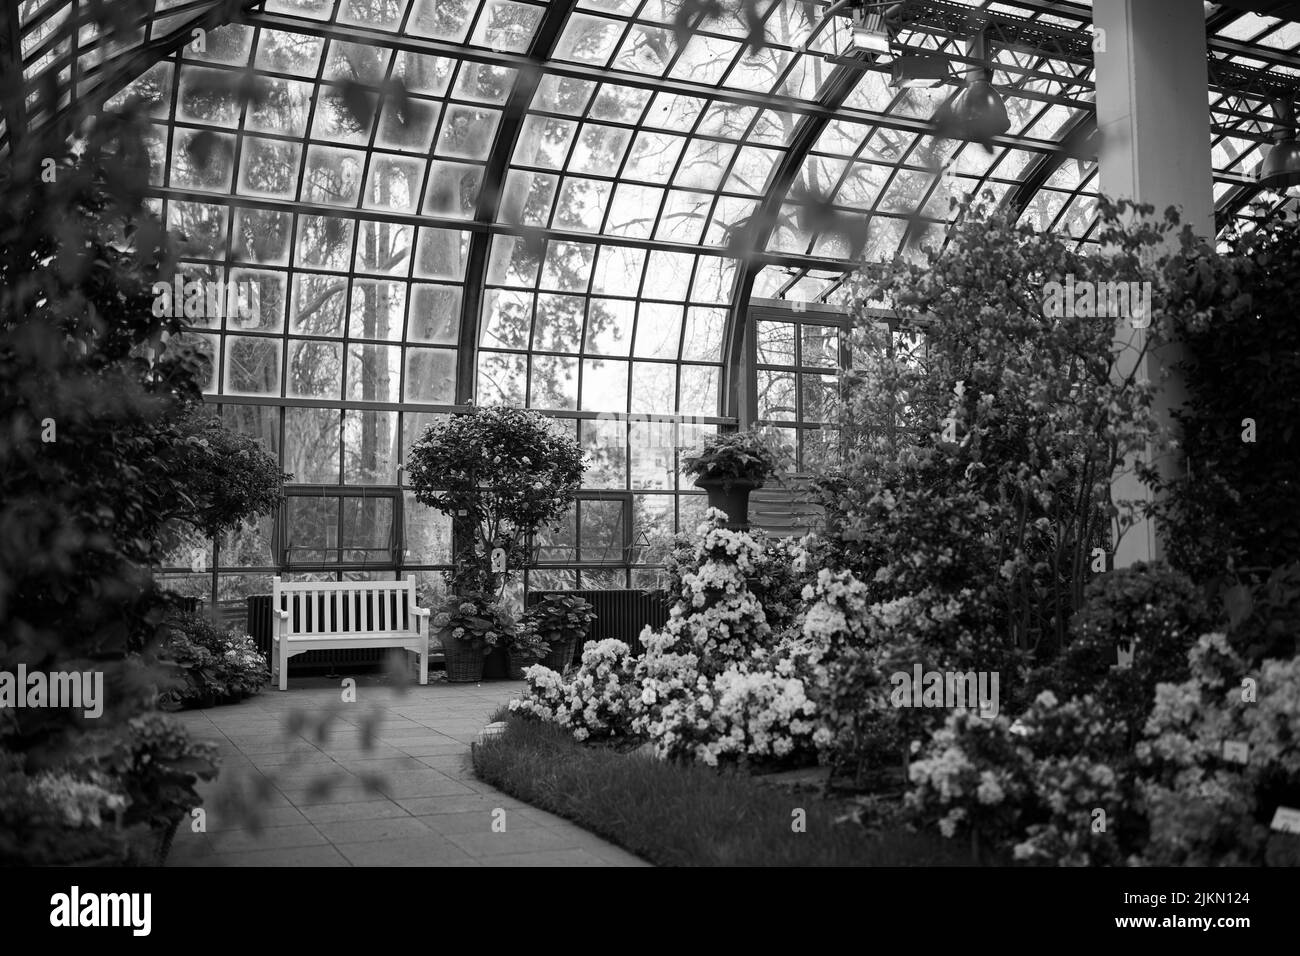 A grayscale shot of the botanical garden with flowers and plants Stock Photo